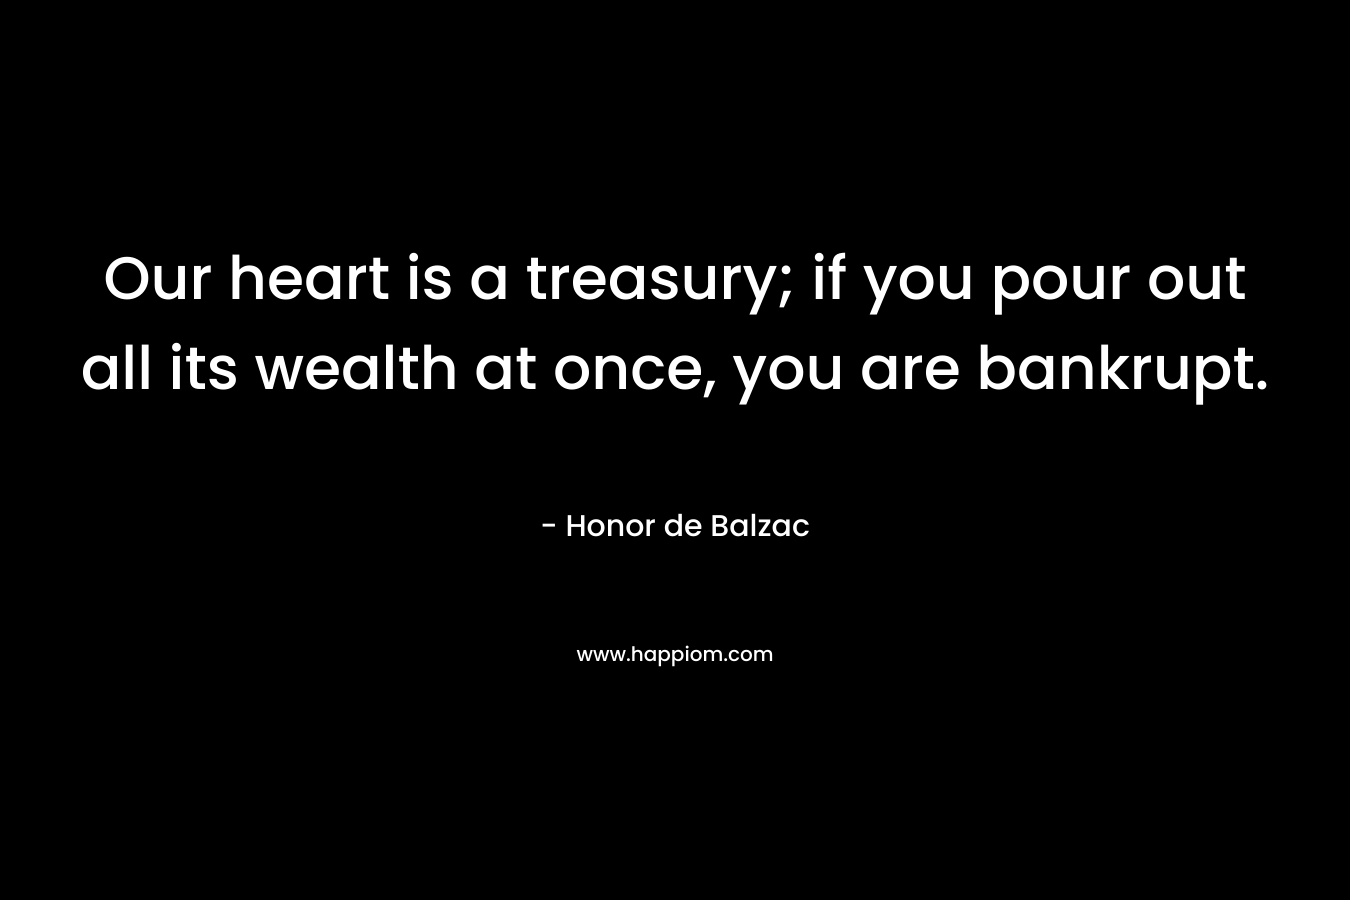 Our heart is a treasury; if you pour out all its wealth at once, you are bankrupt.